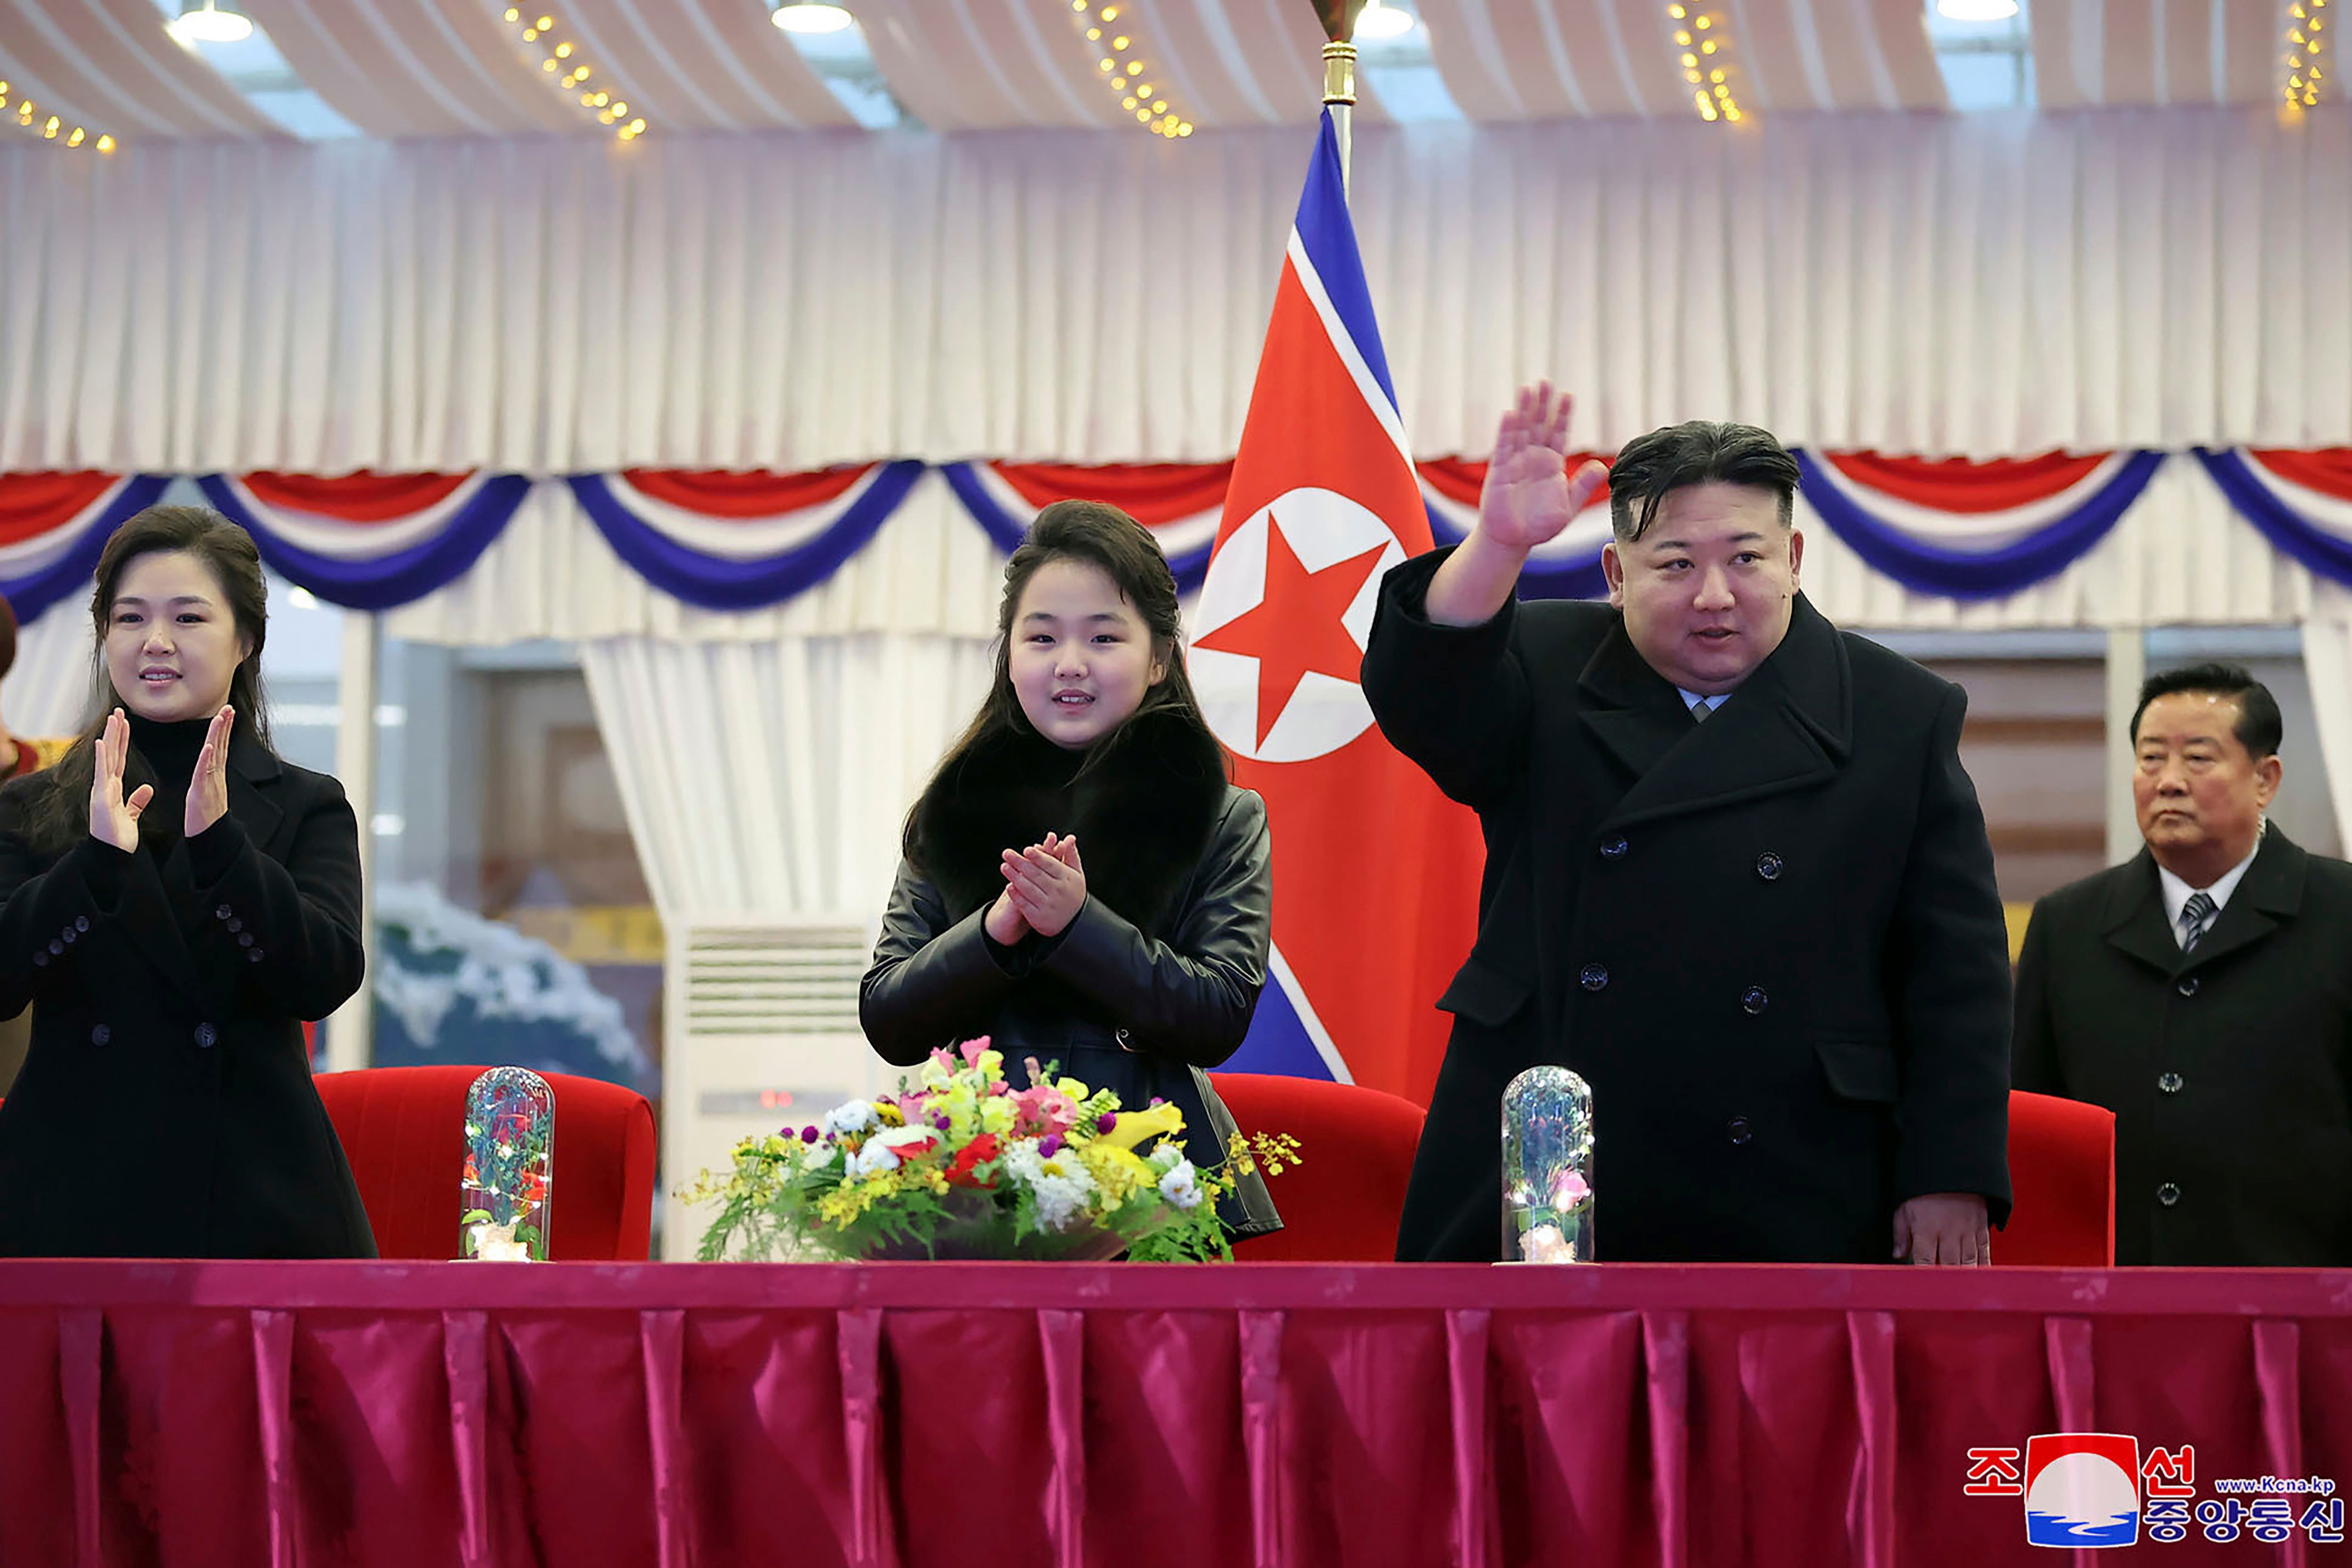 South Korea Views The Young Daughter Of North Korean Leader Kim Jong Un As His Likely Successor 3898